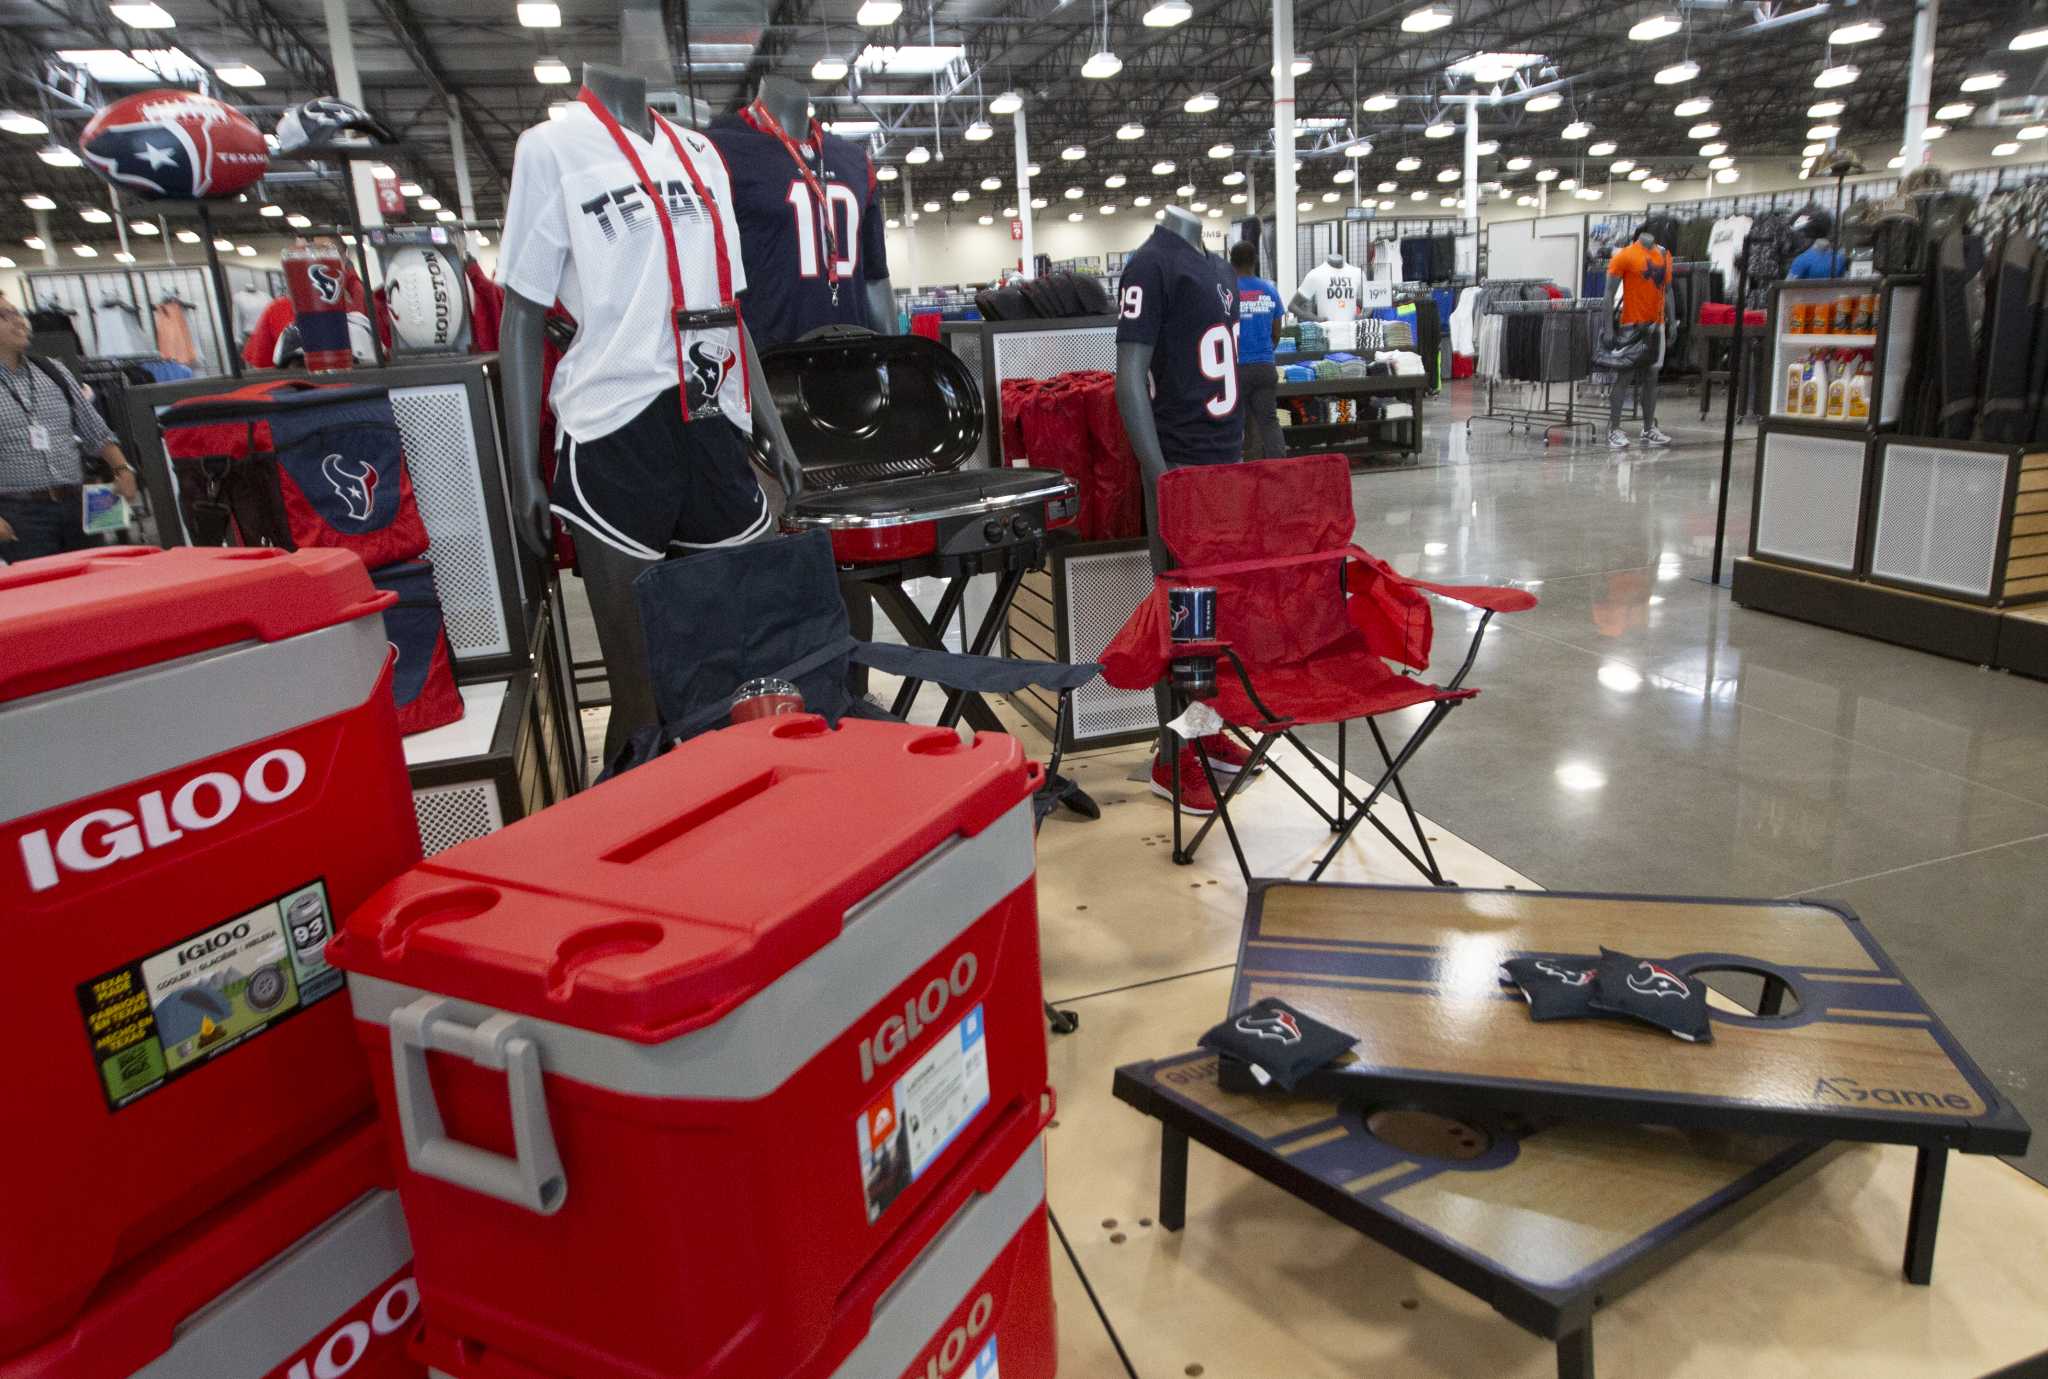 Academy Sports + Outdoors Store in Dallas, TX